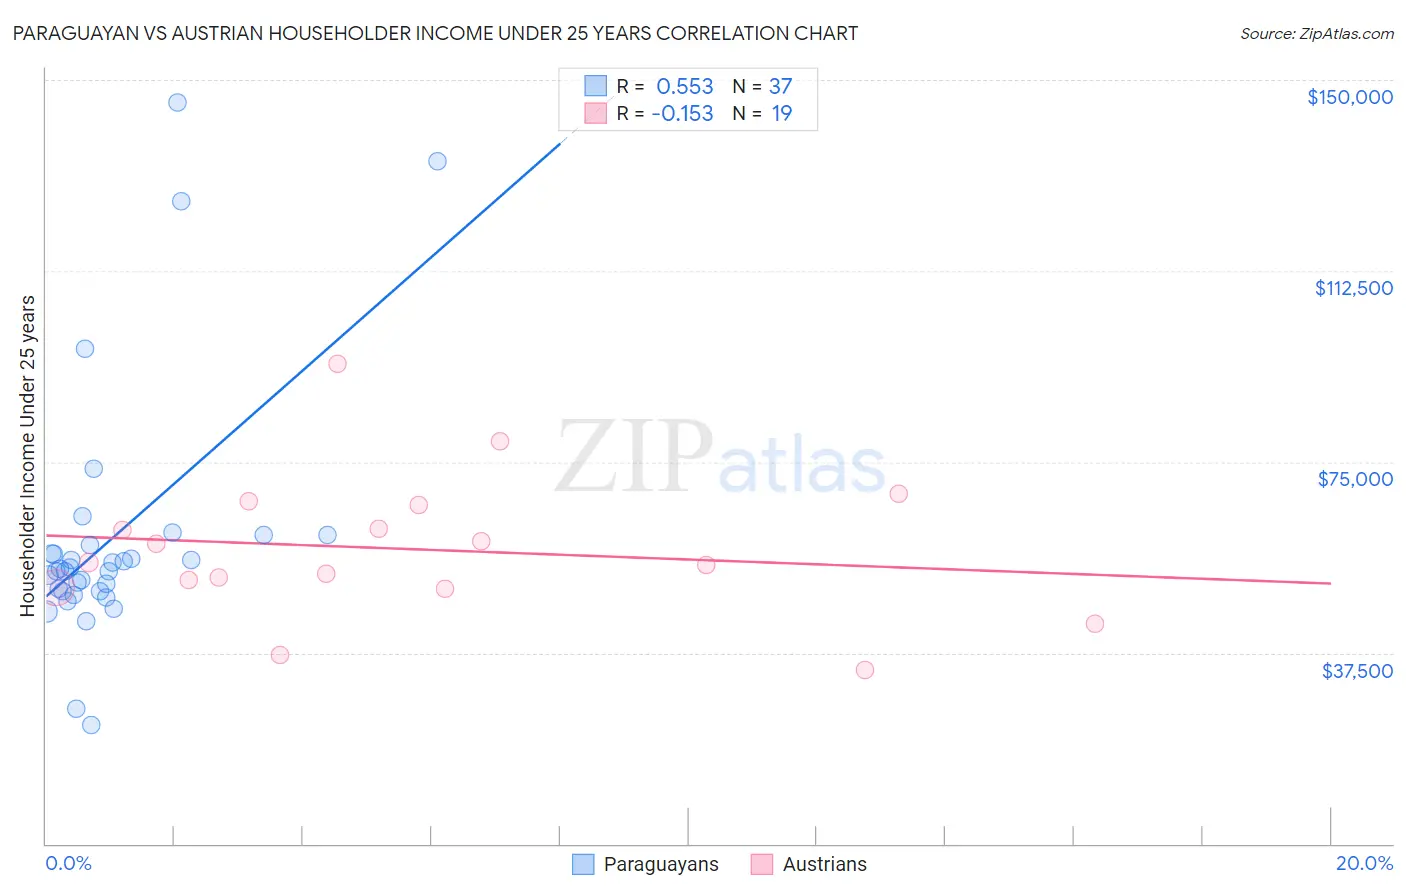 Paraguayan vs Austrian Householder Income Under 25 years